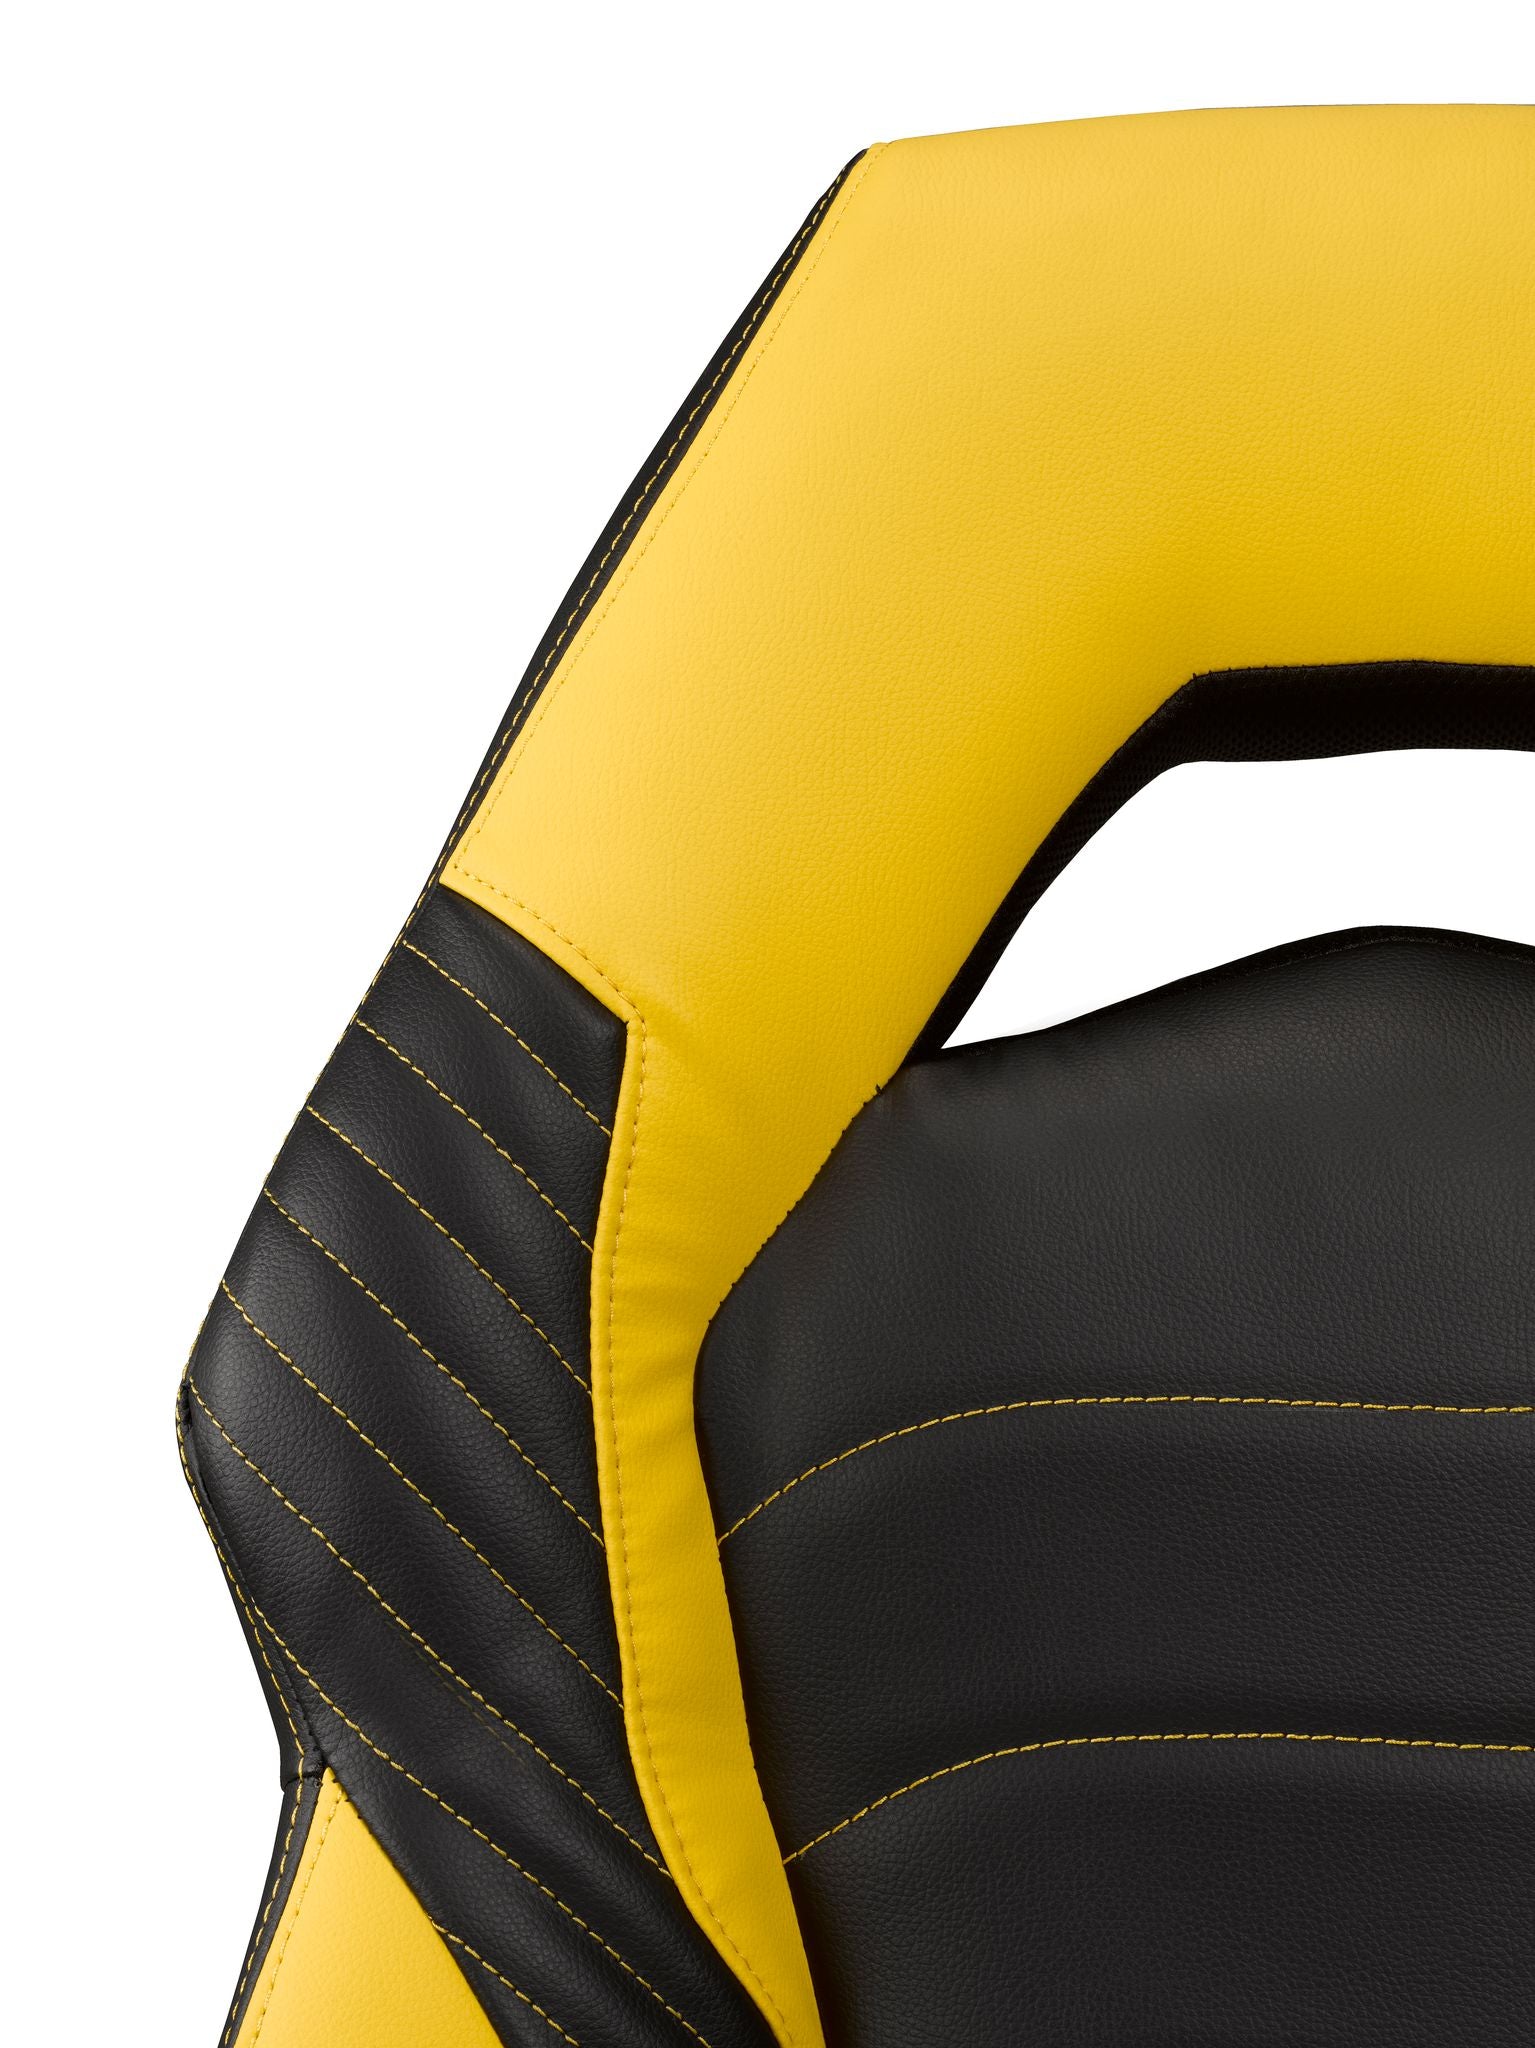 Office Chair Black/Yellow 2857-YL